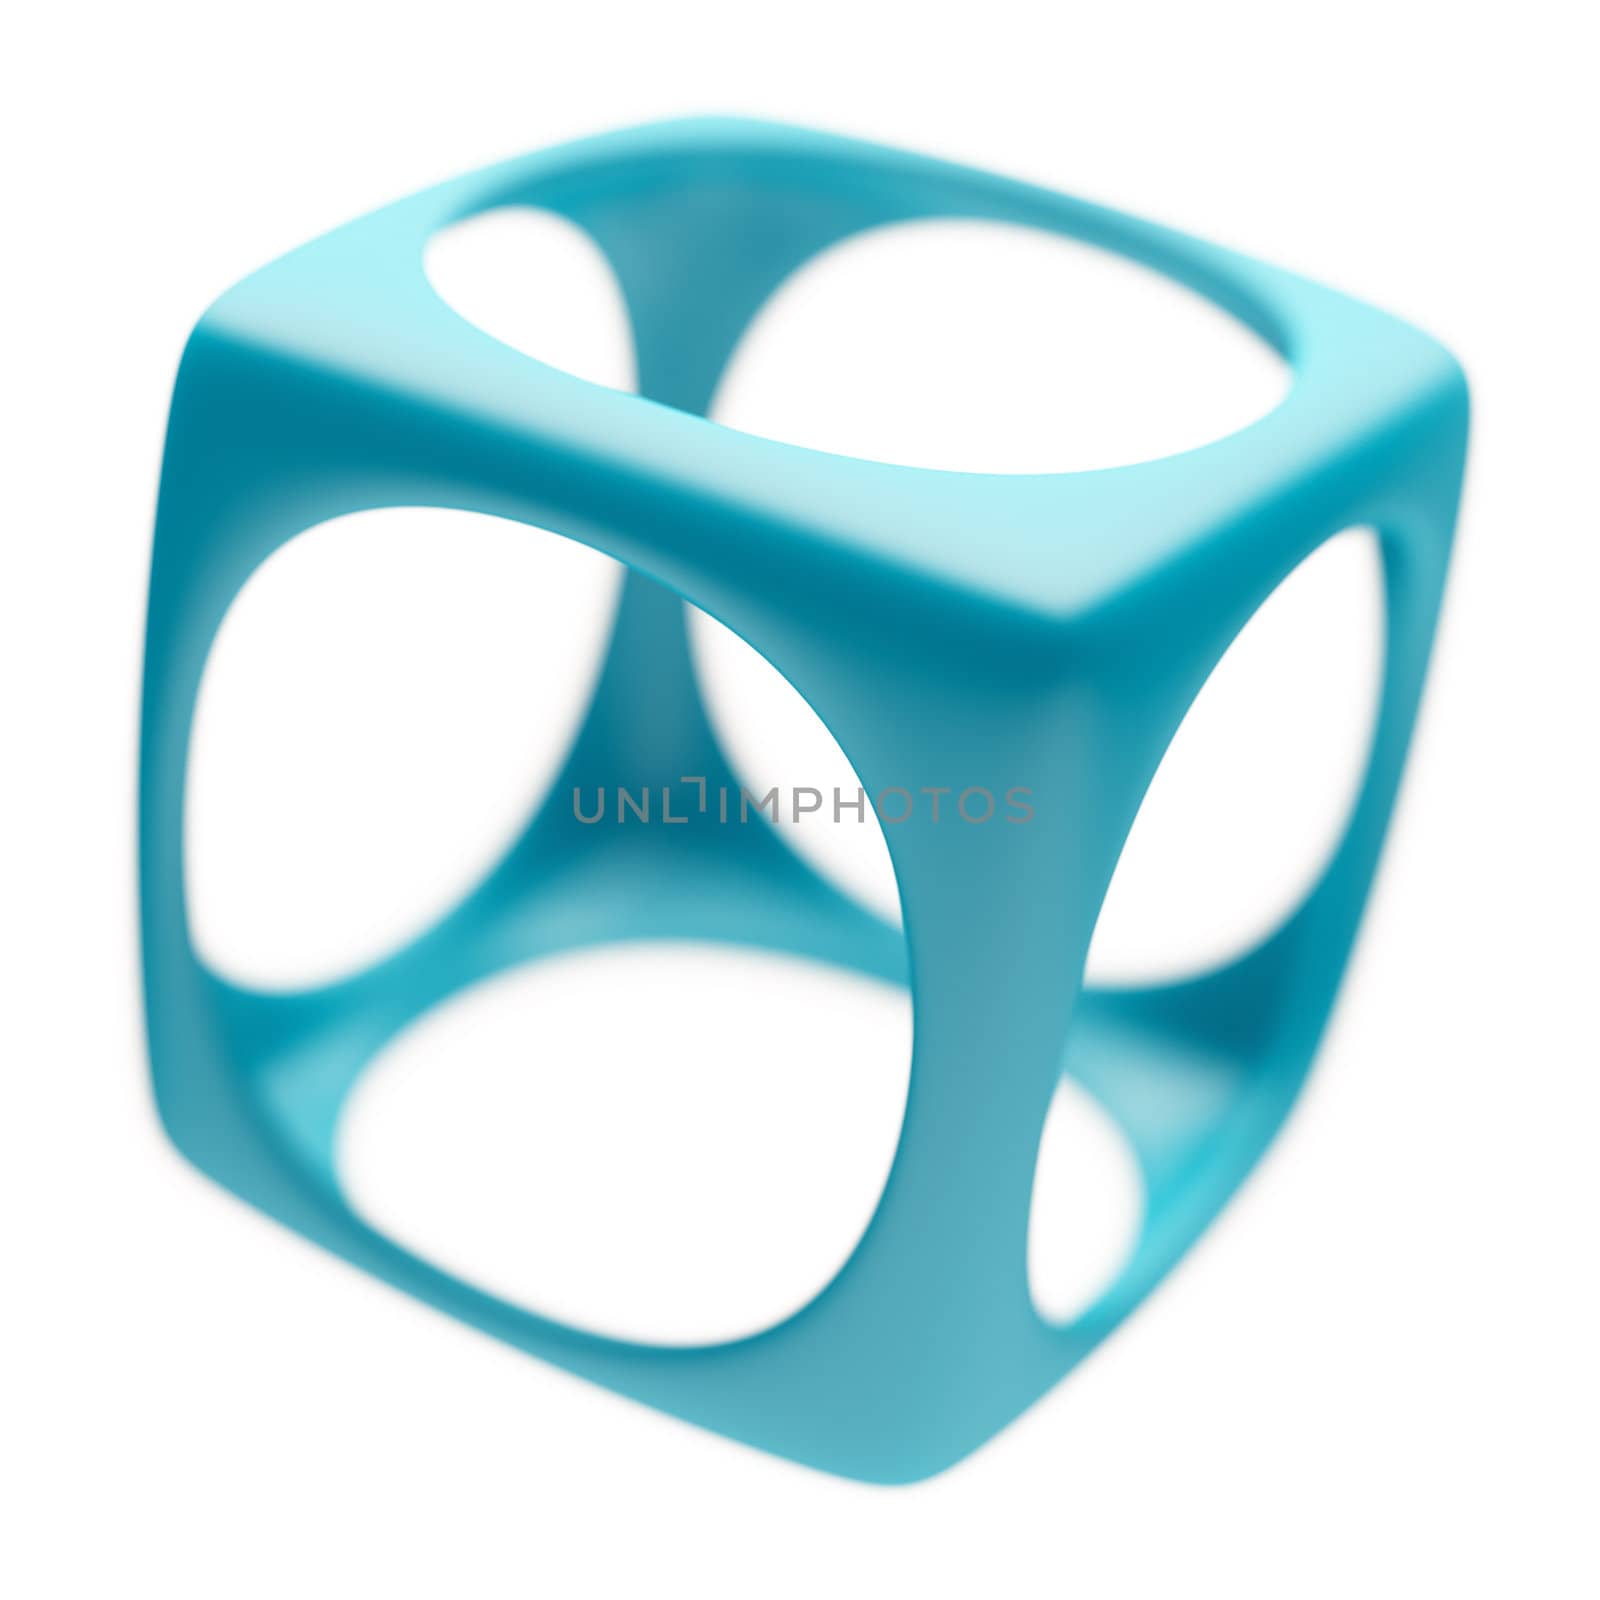 3d Illustration of Blue Abstract Cube Isolated on White